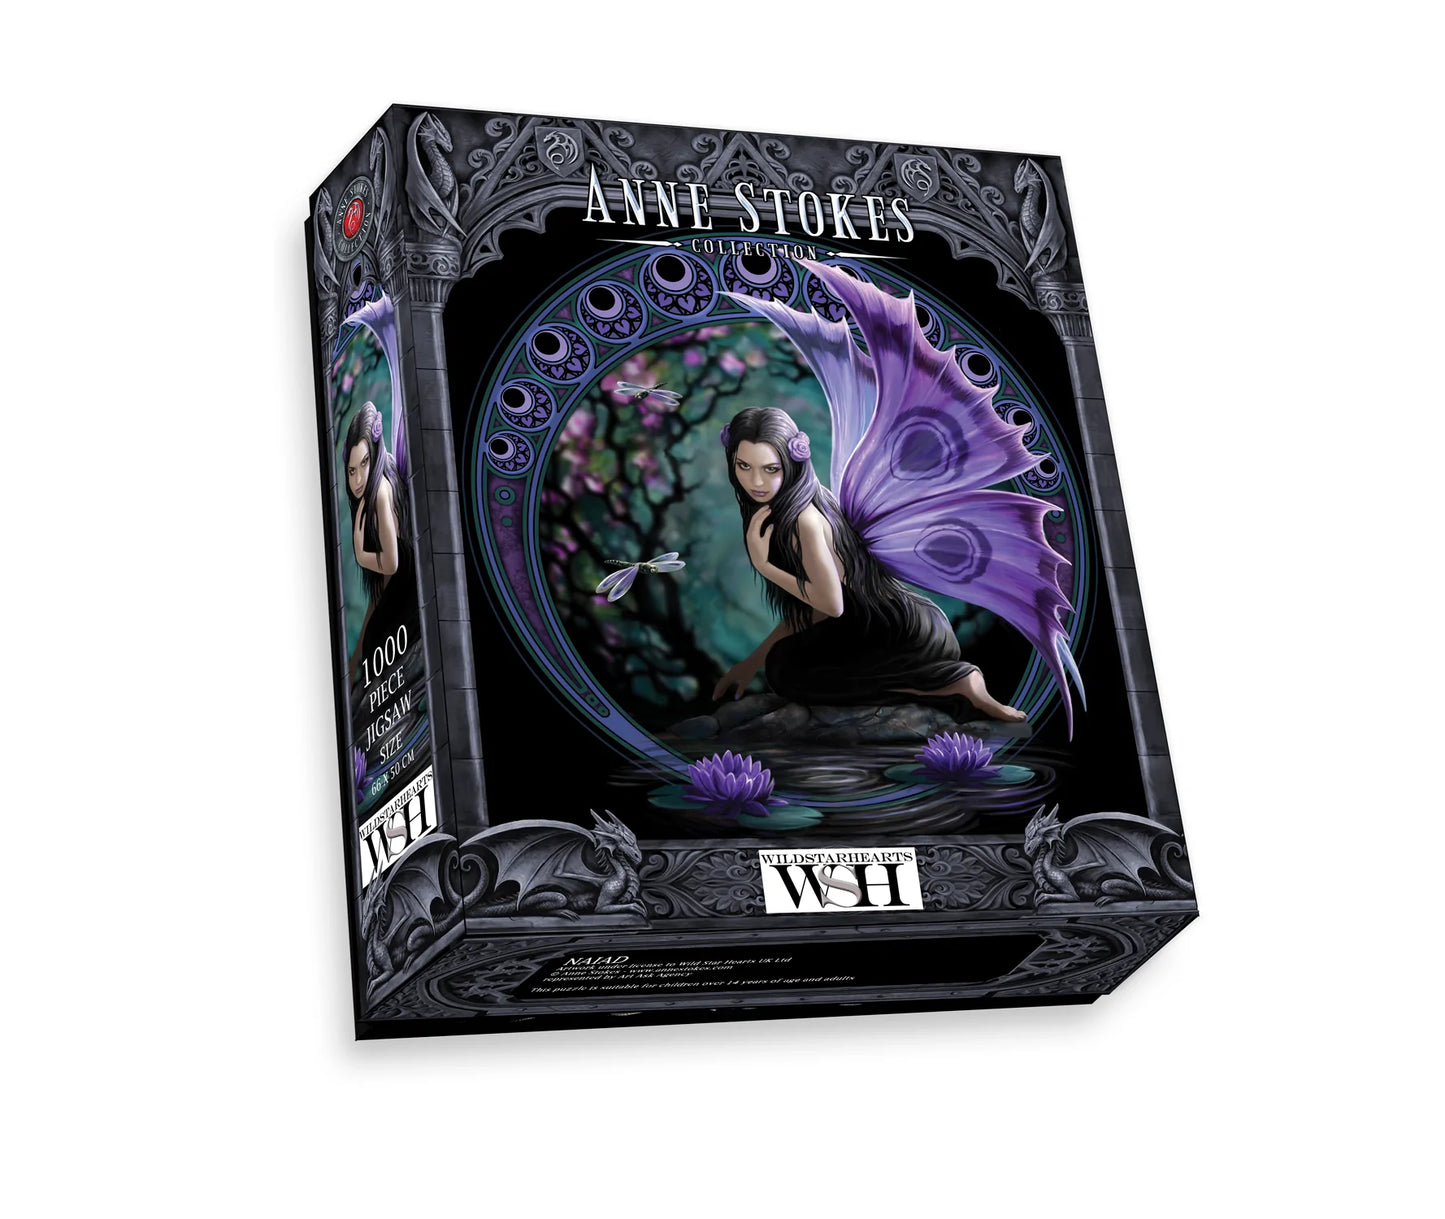 Naiad af Anne Stokes, 1000 Piece Limited Edition-puslespil